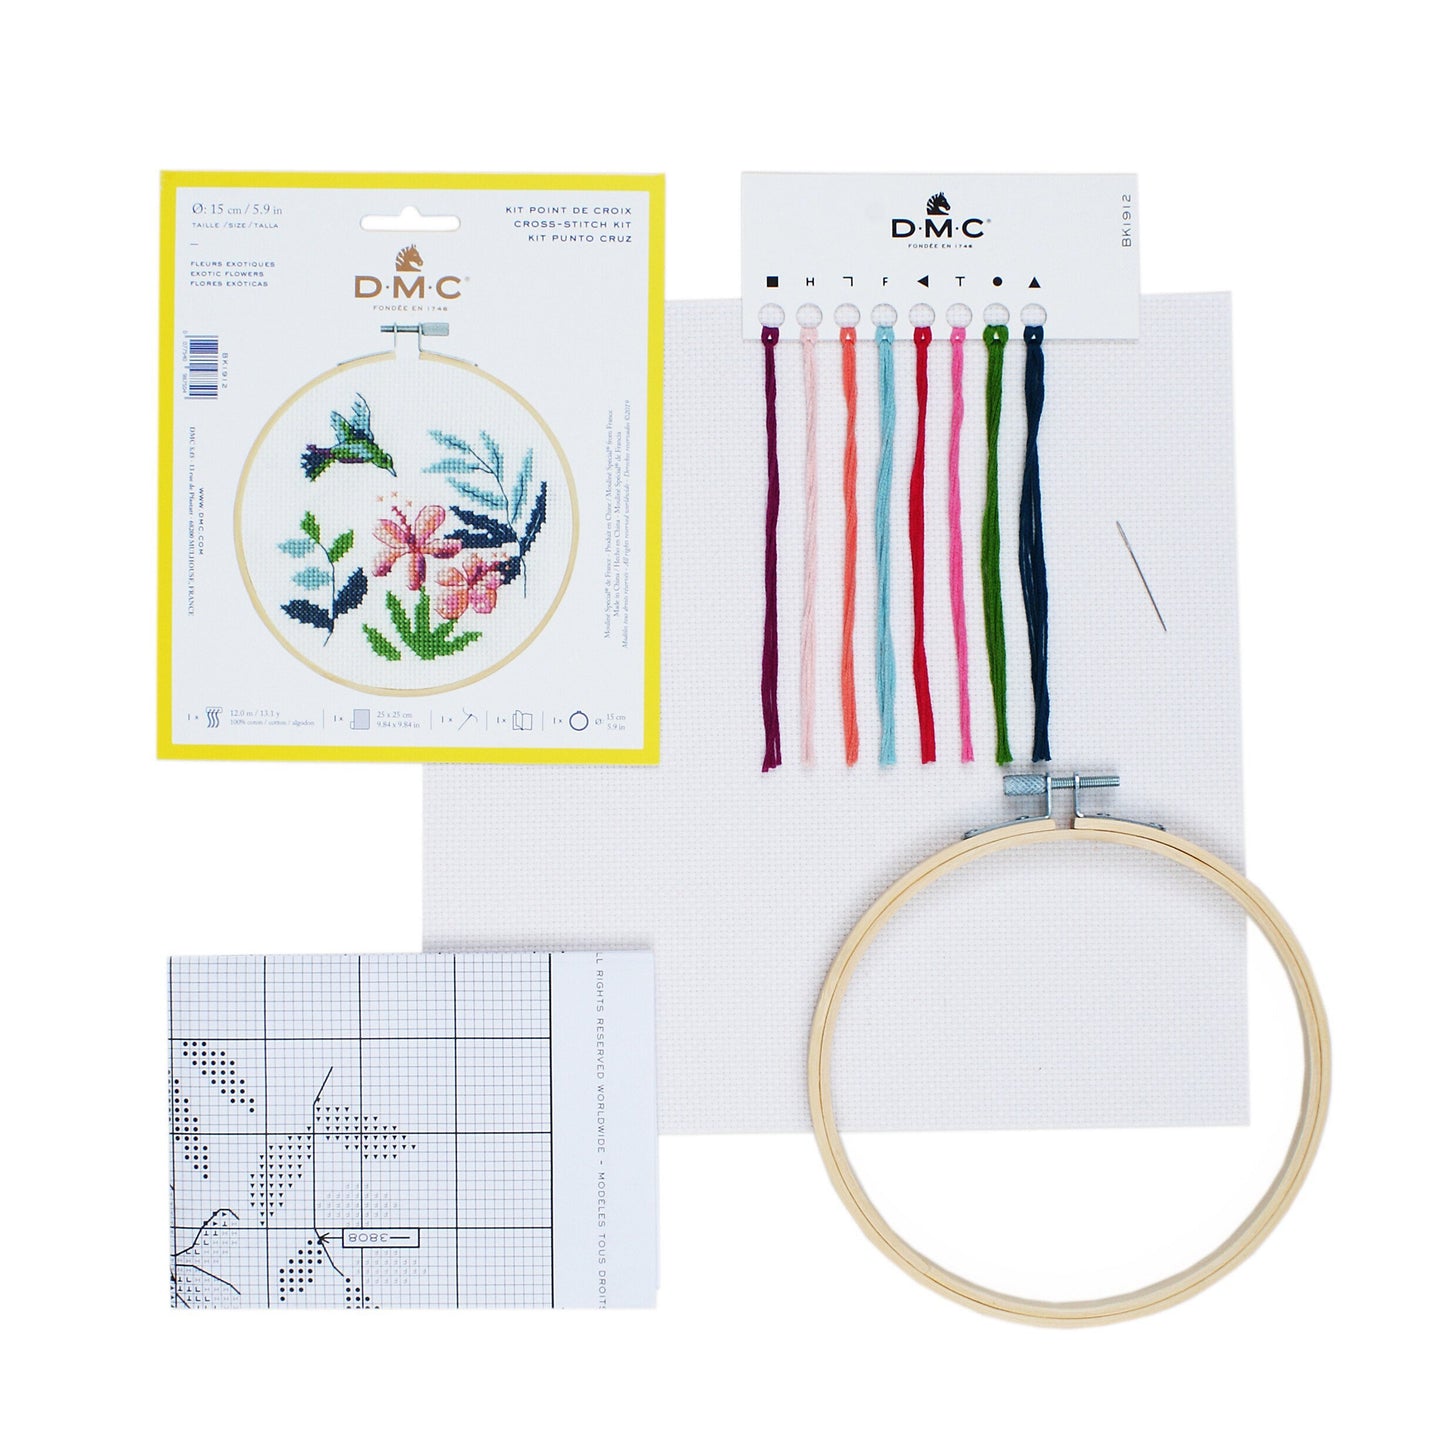 Hummingbird Cross Stitch Kit - Pattern, Floss, Fabric, Hoop and Needle included